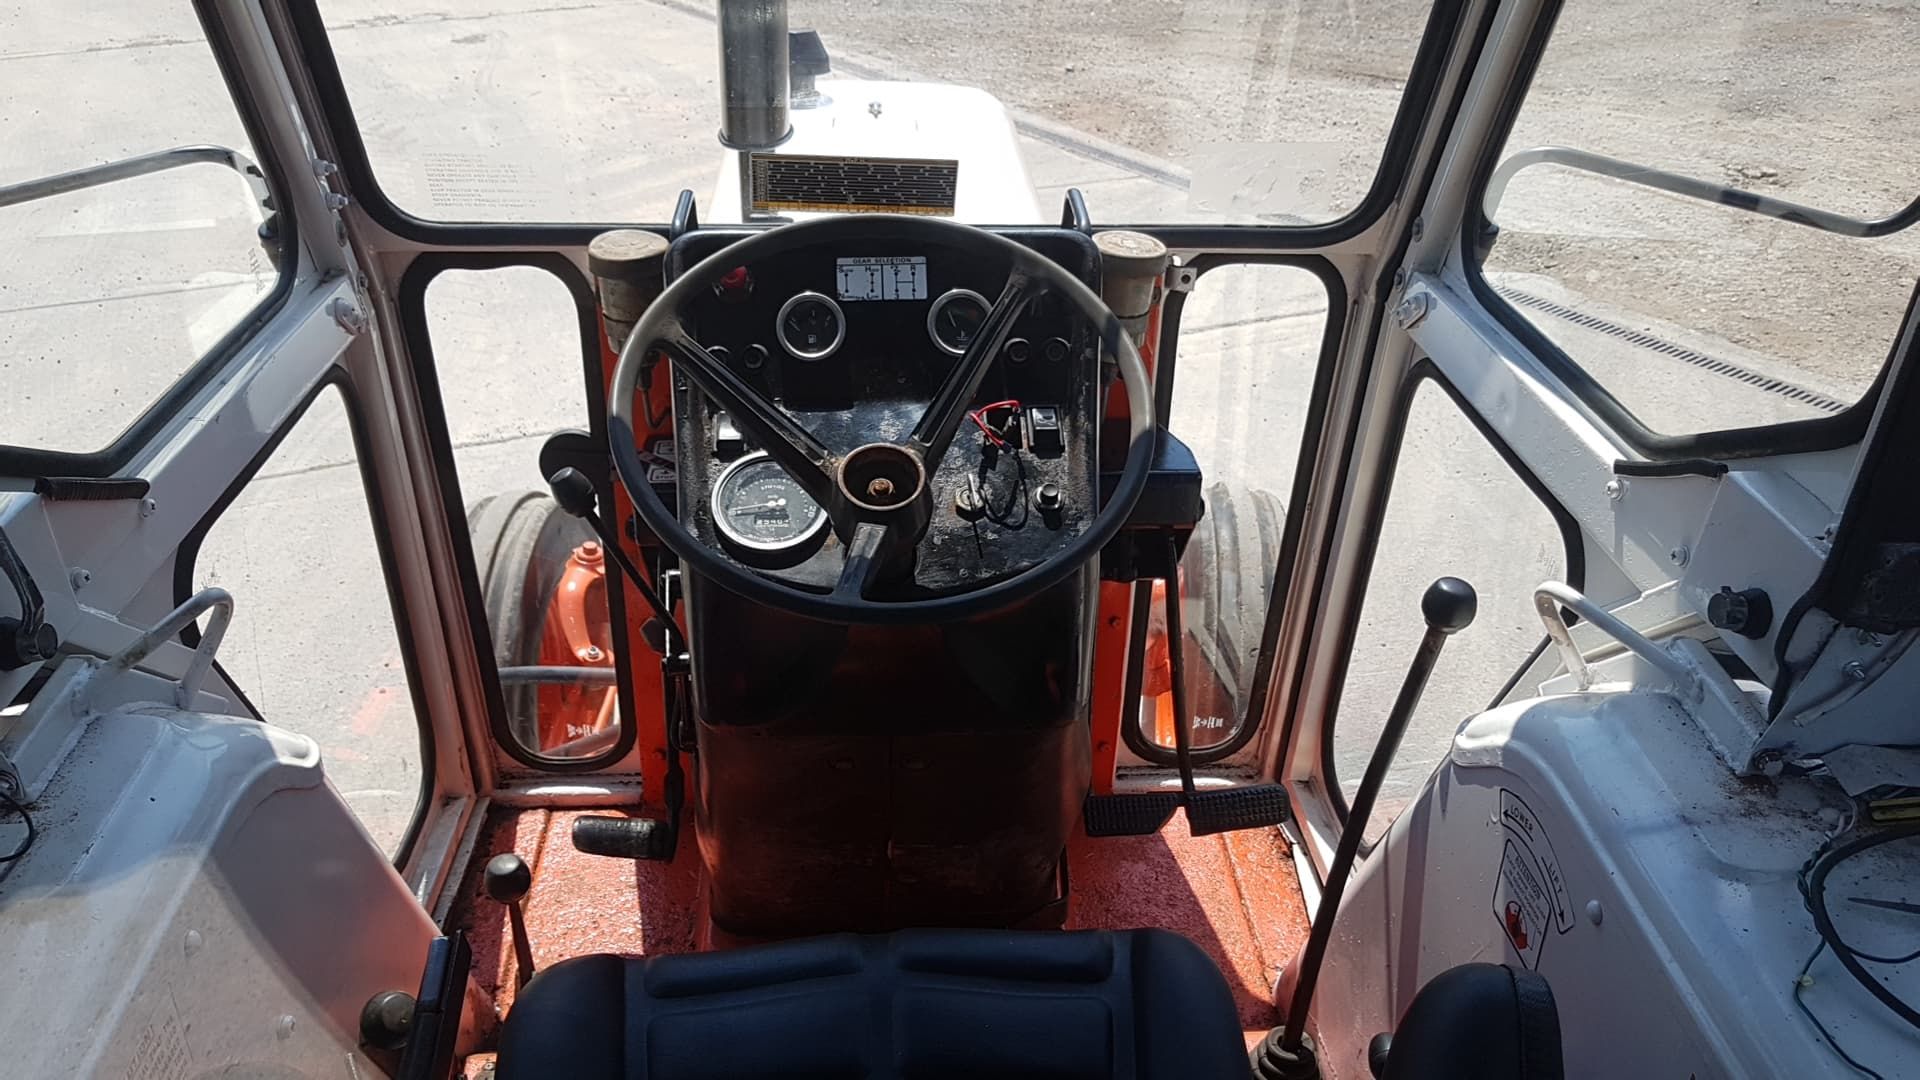 1979, David Brown 996 2wd Tractor - Nicely refurbished and ready for work. - Image 8 of 11